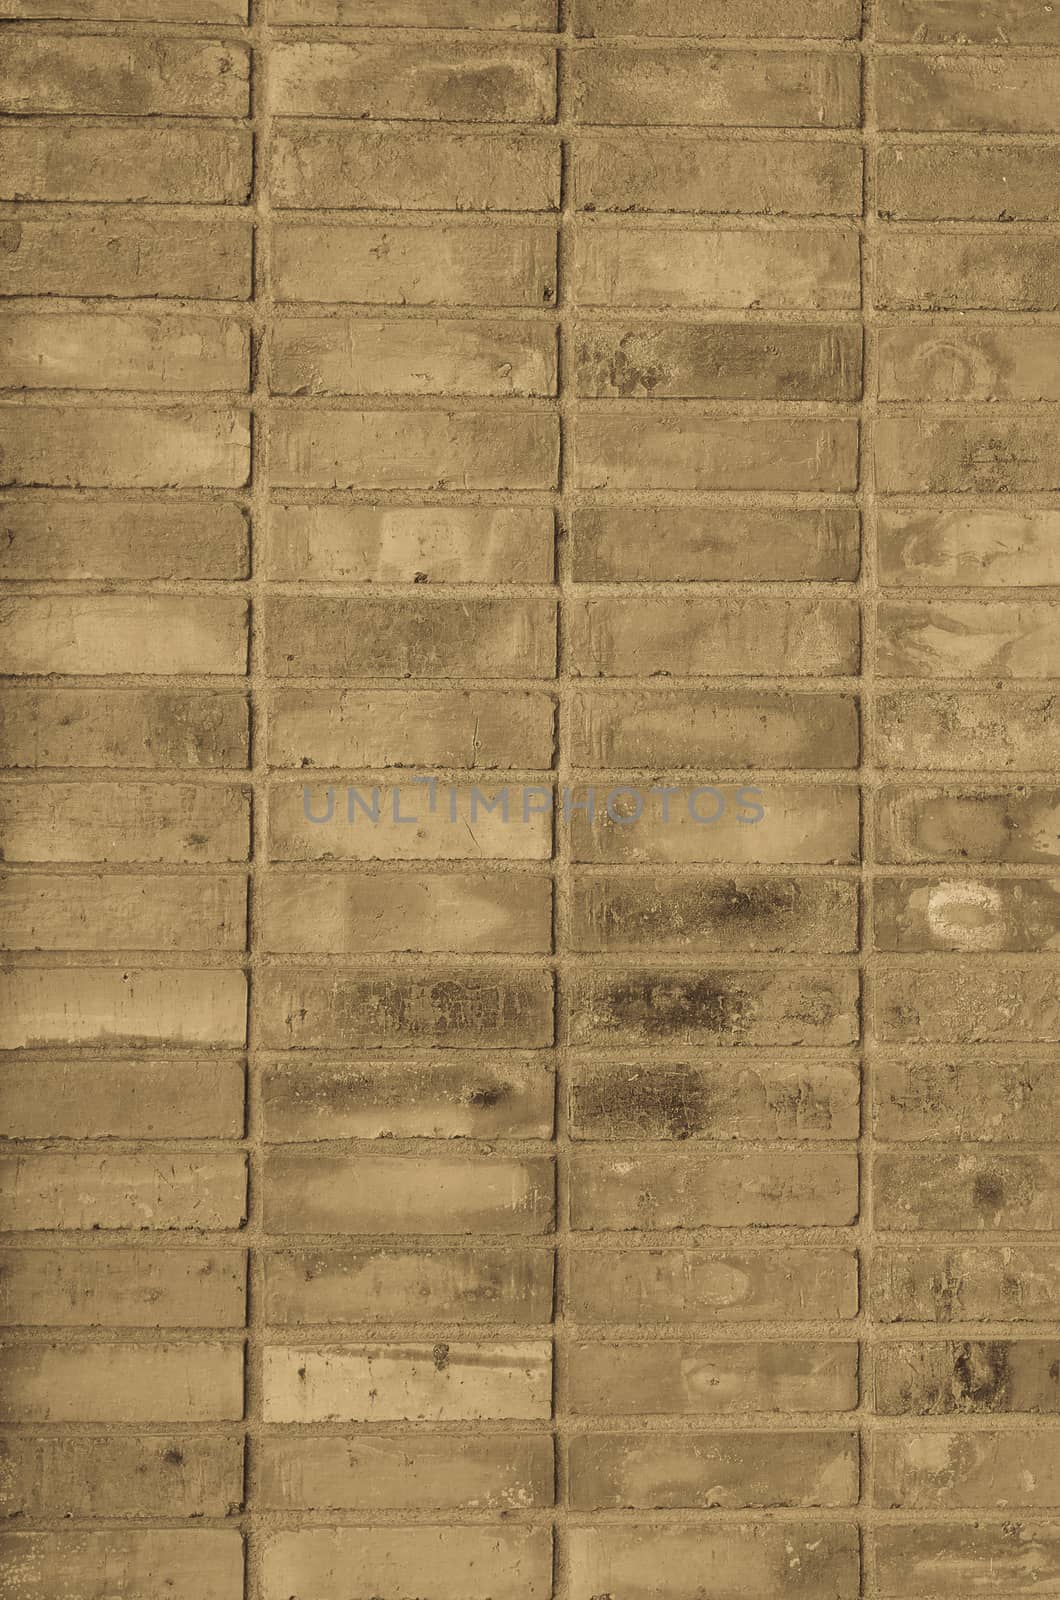 Background of antique brick wall texture . by nopparats